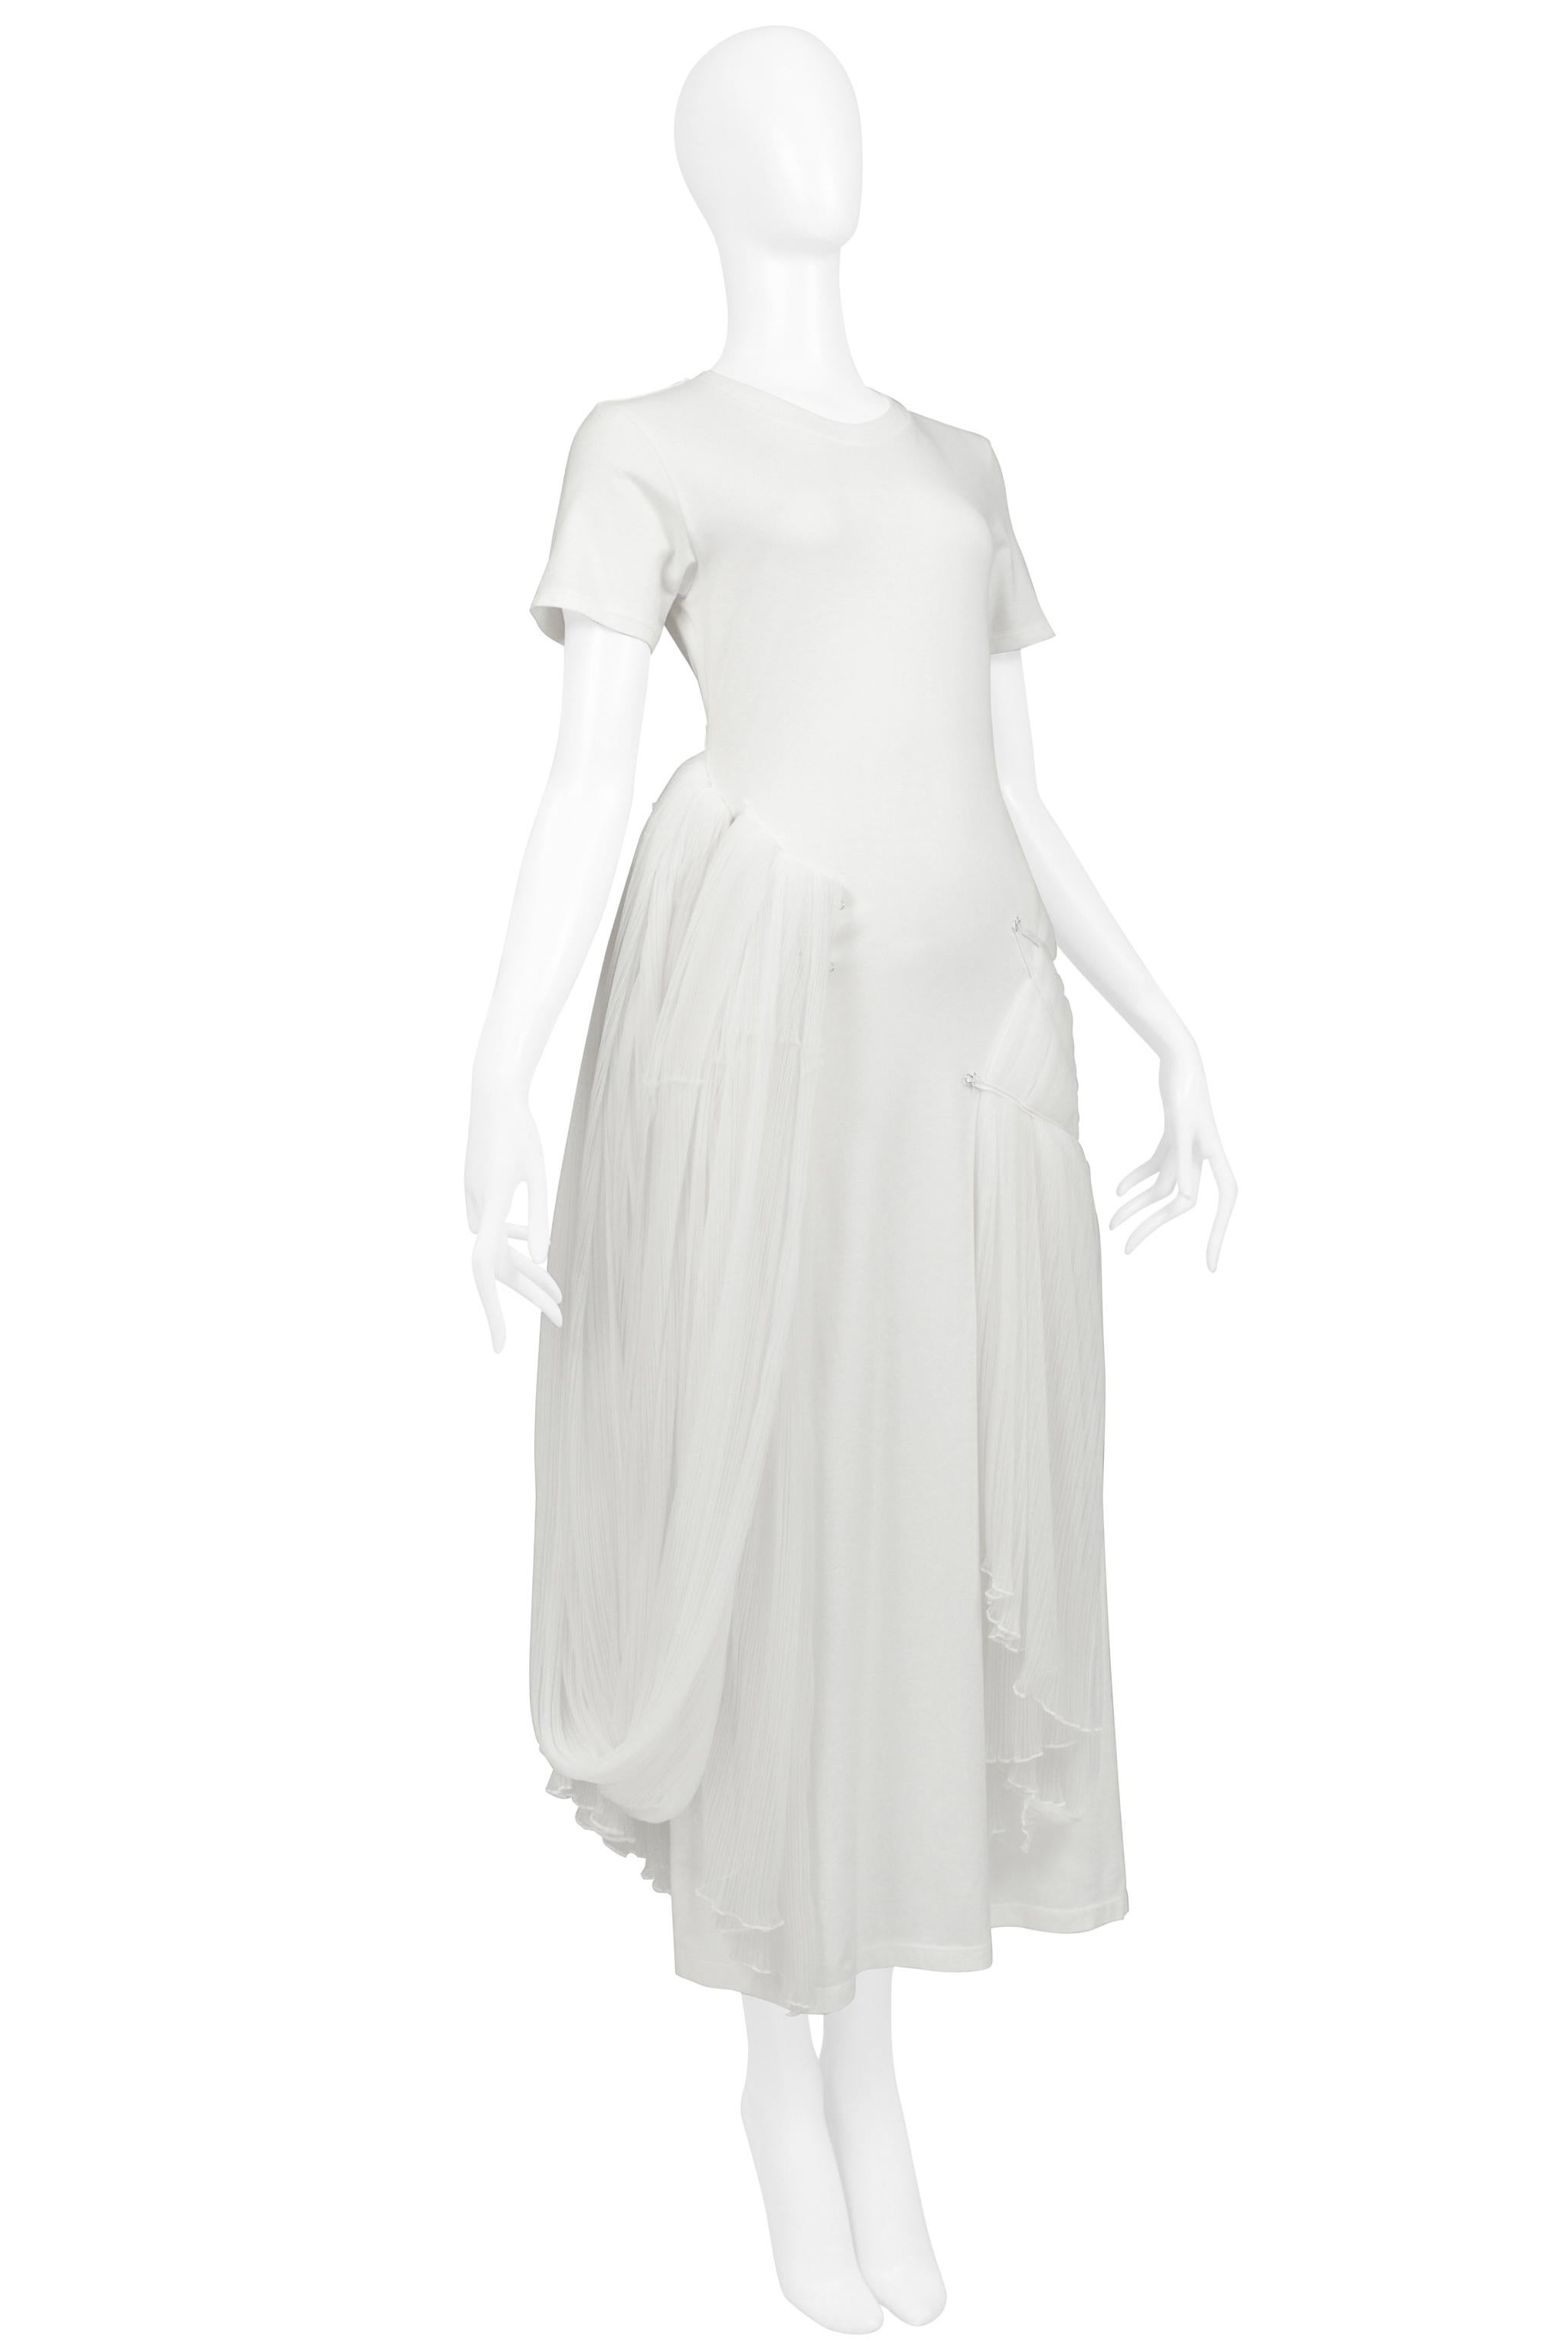 Issey Miyake Iconic White Goddess Concept Dress 2003 For Sale 4